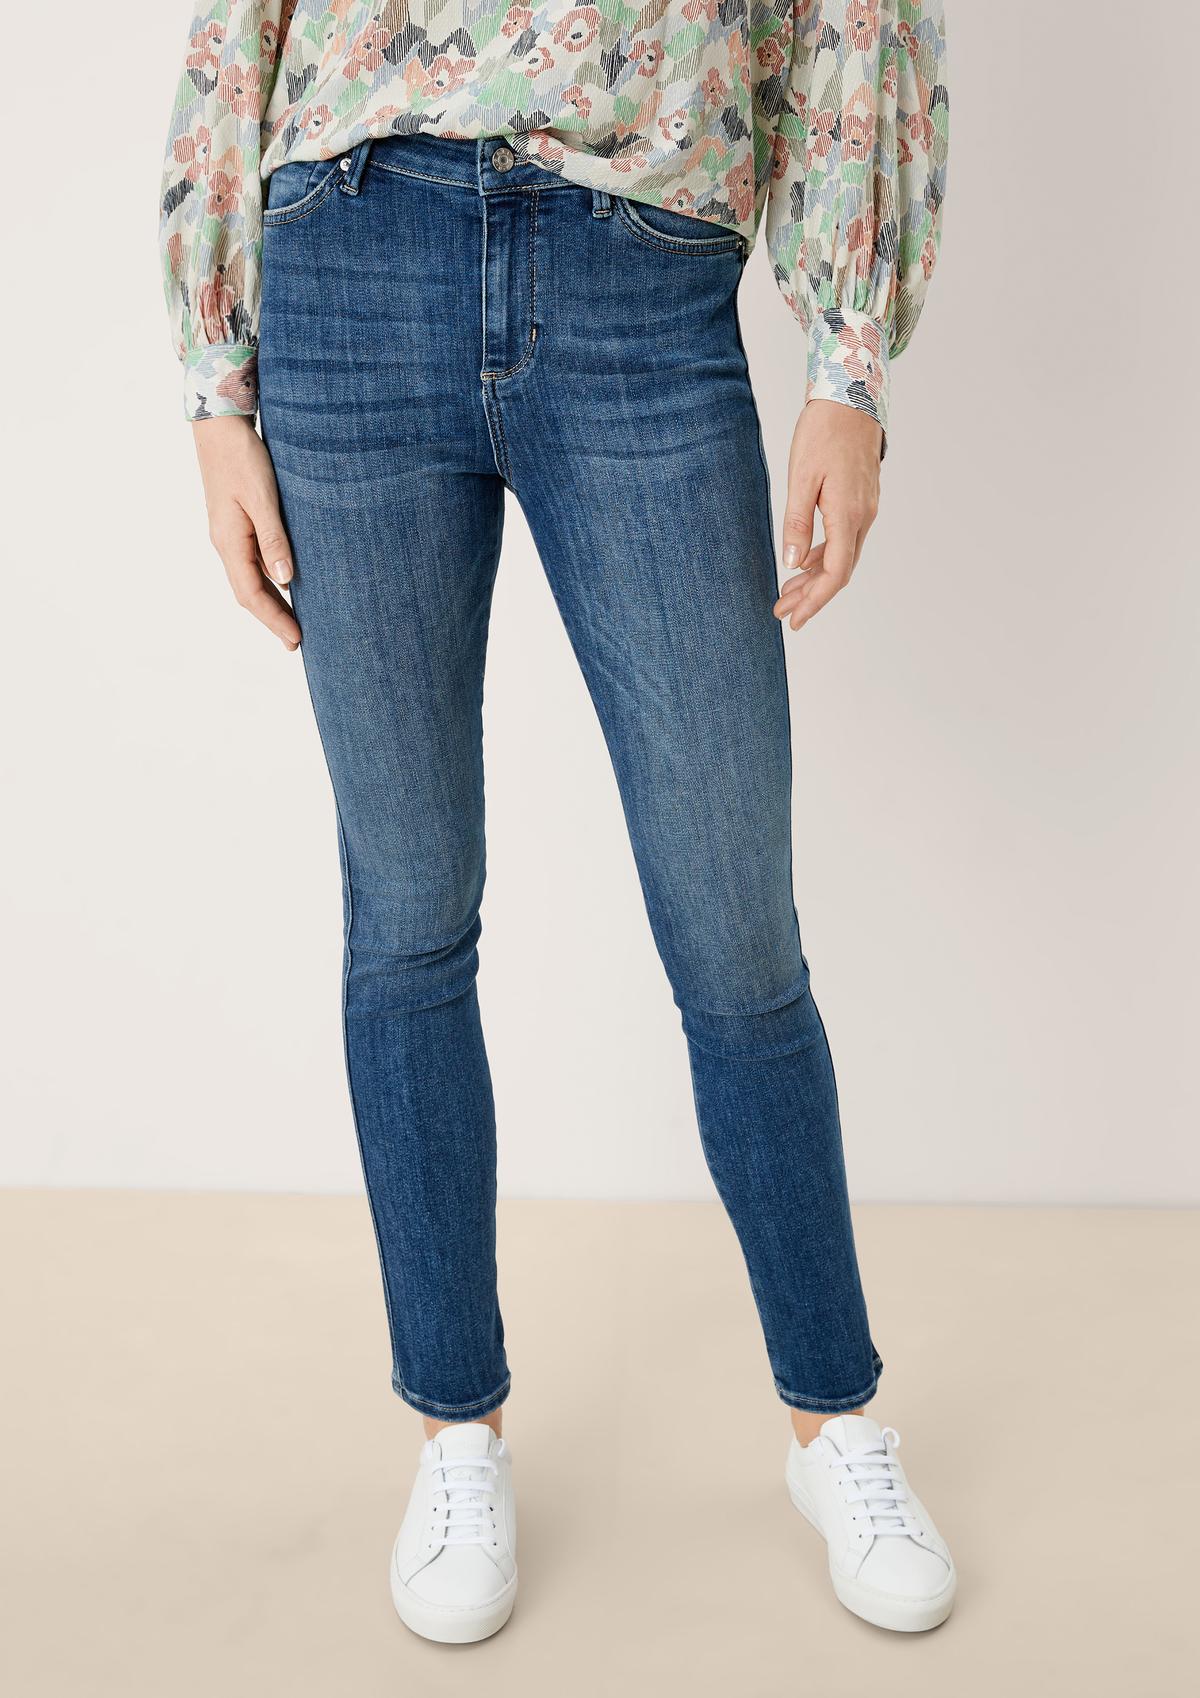 Skinny: Jeans with a super skinny leg